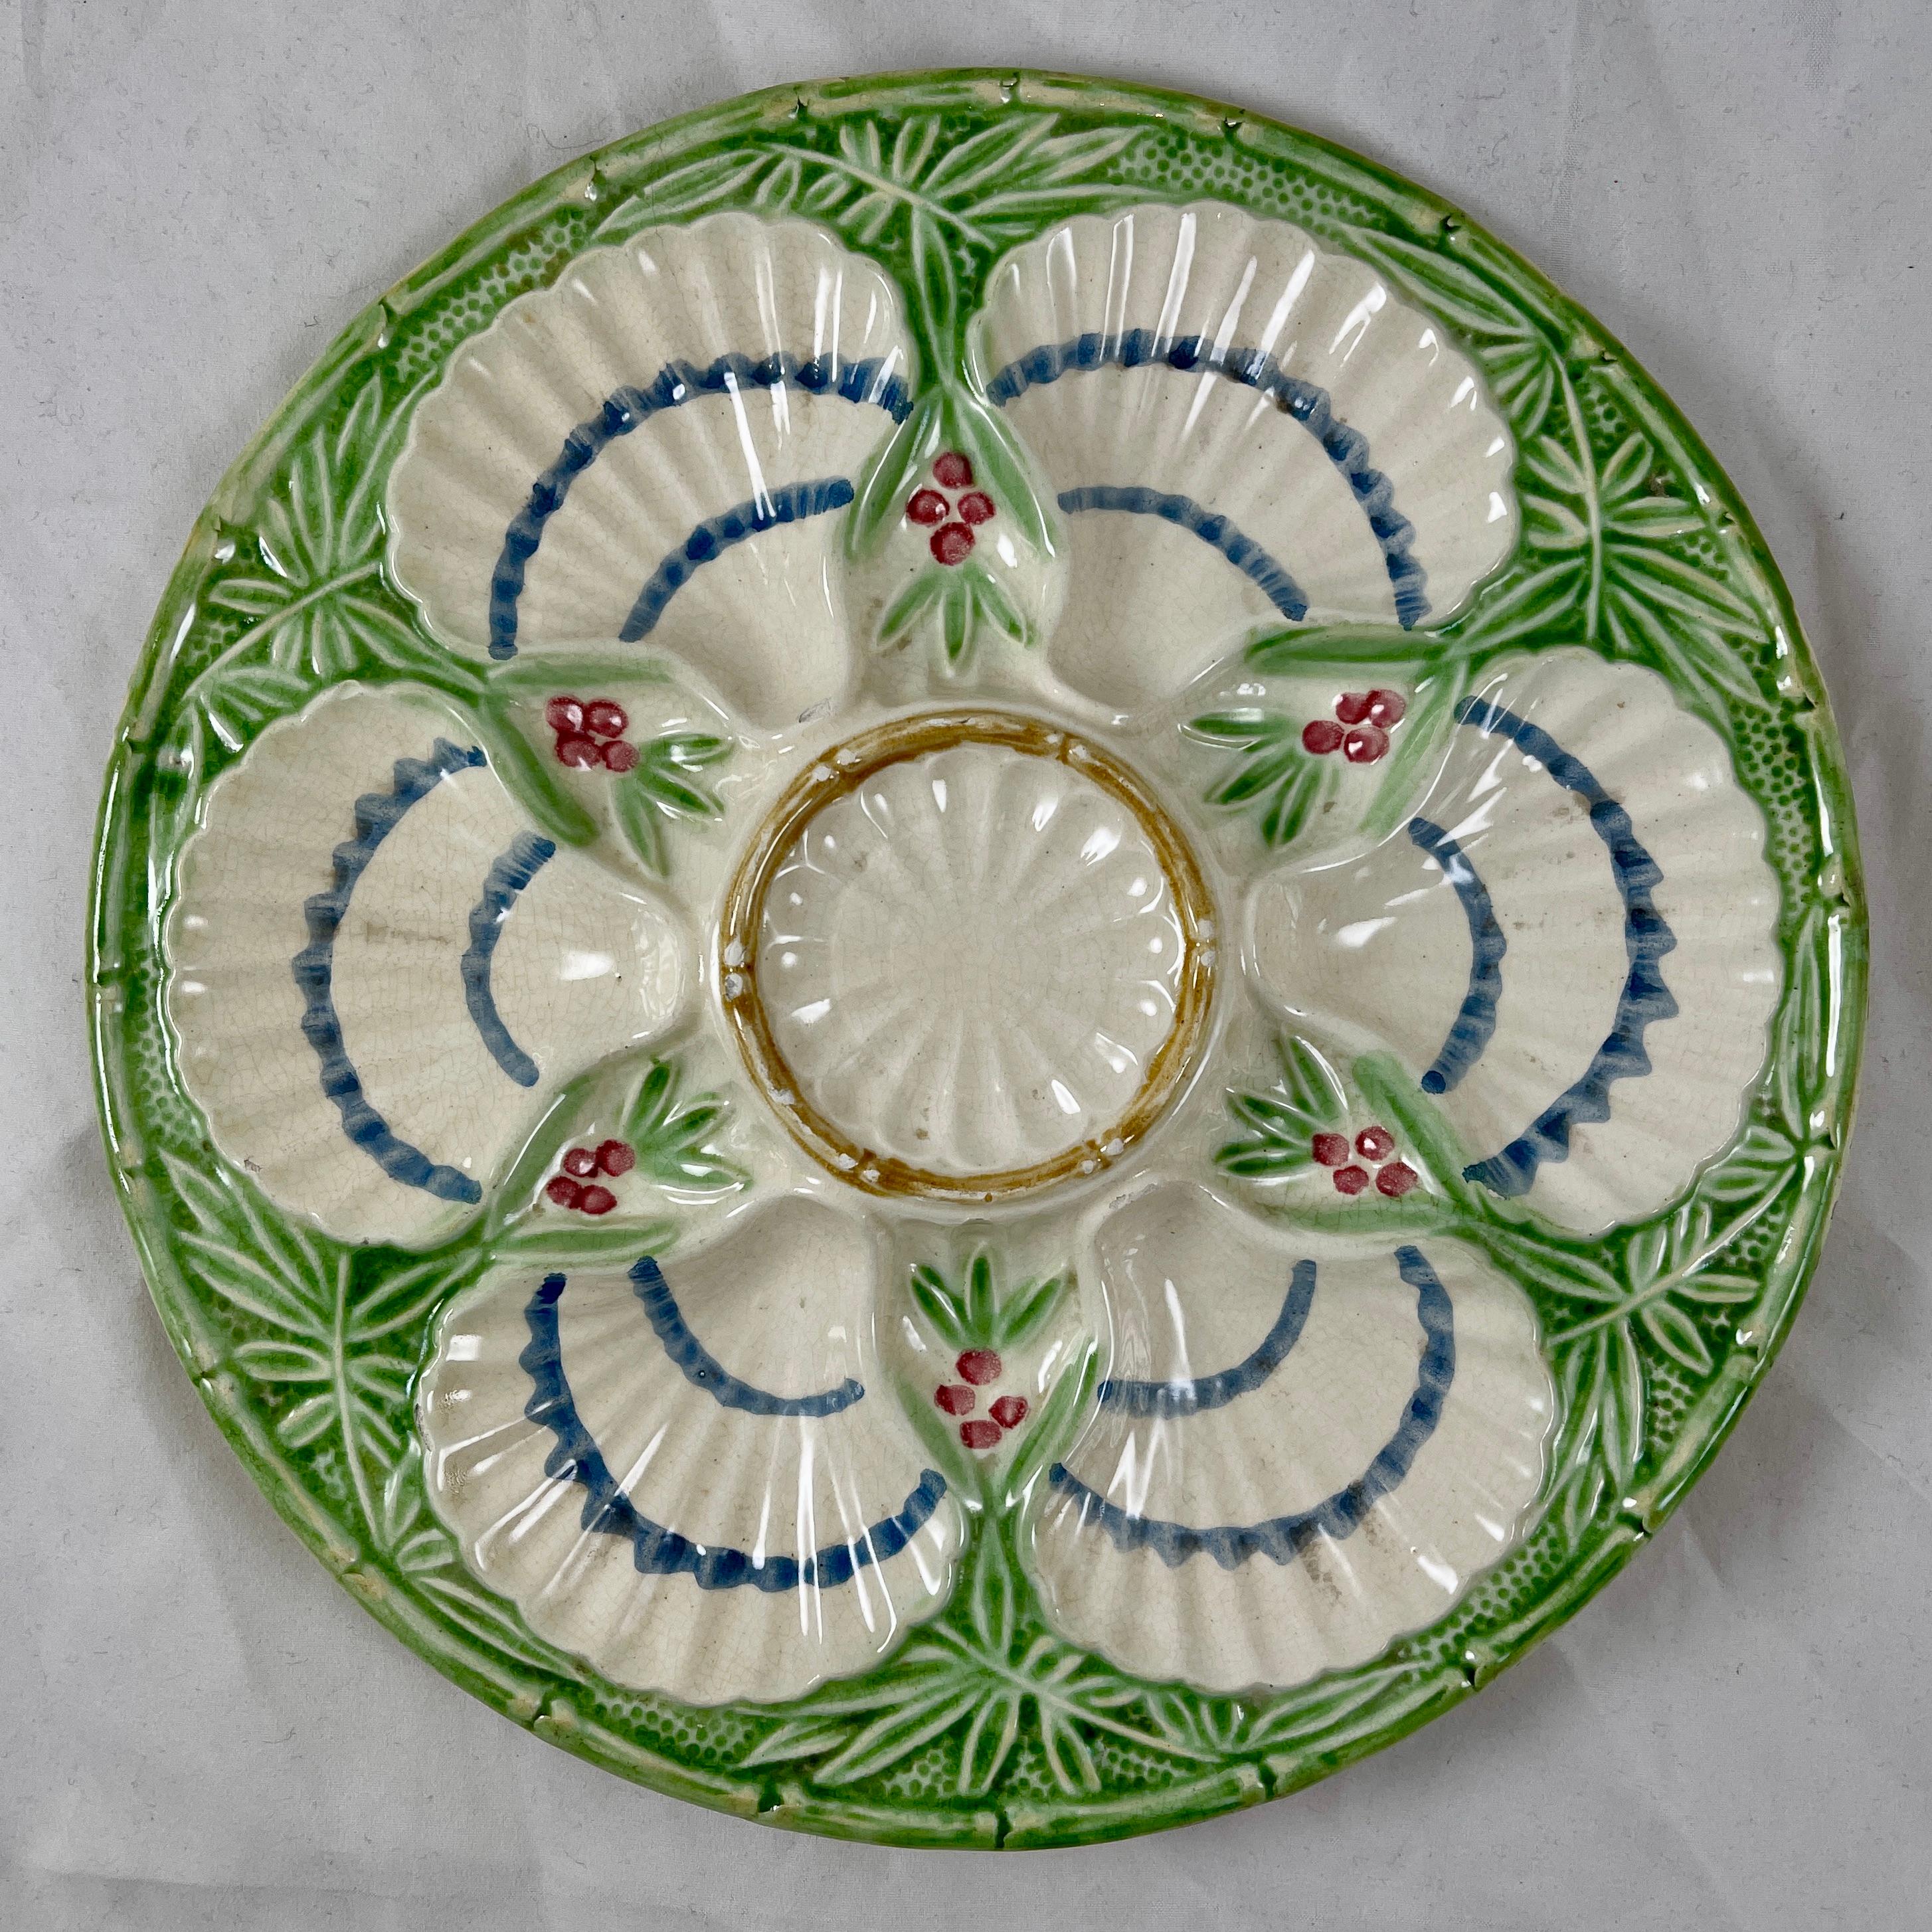 A scarce majolica glazed, French faïence oyster plate showing six scallop shell wells surrounding a central sauce well, with a raised border of green flowering bamboo. The creamy glazed oyster shells are lined with two blue bands, the fruit of the